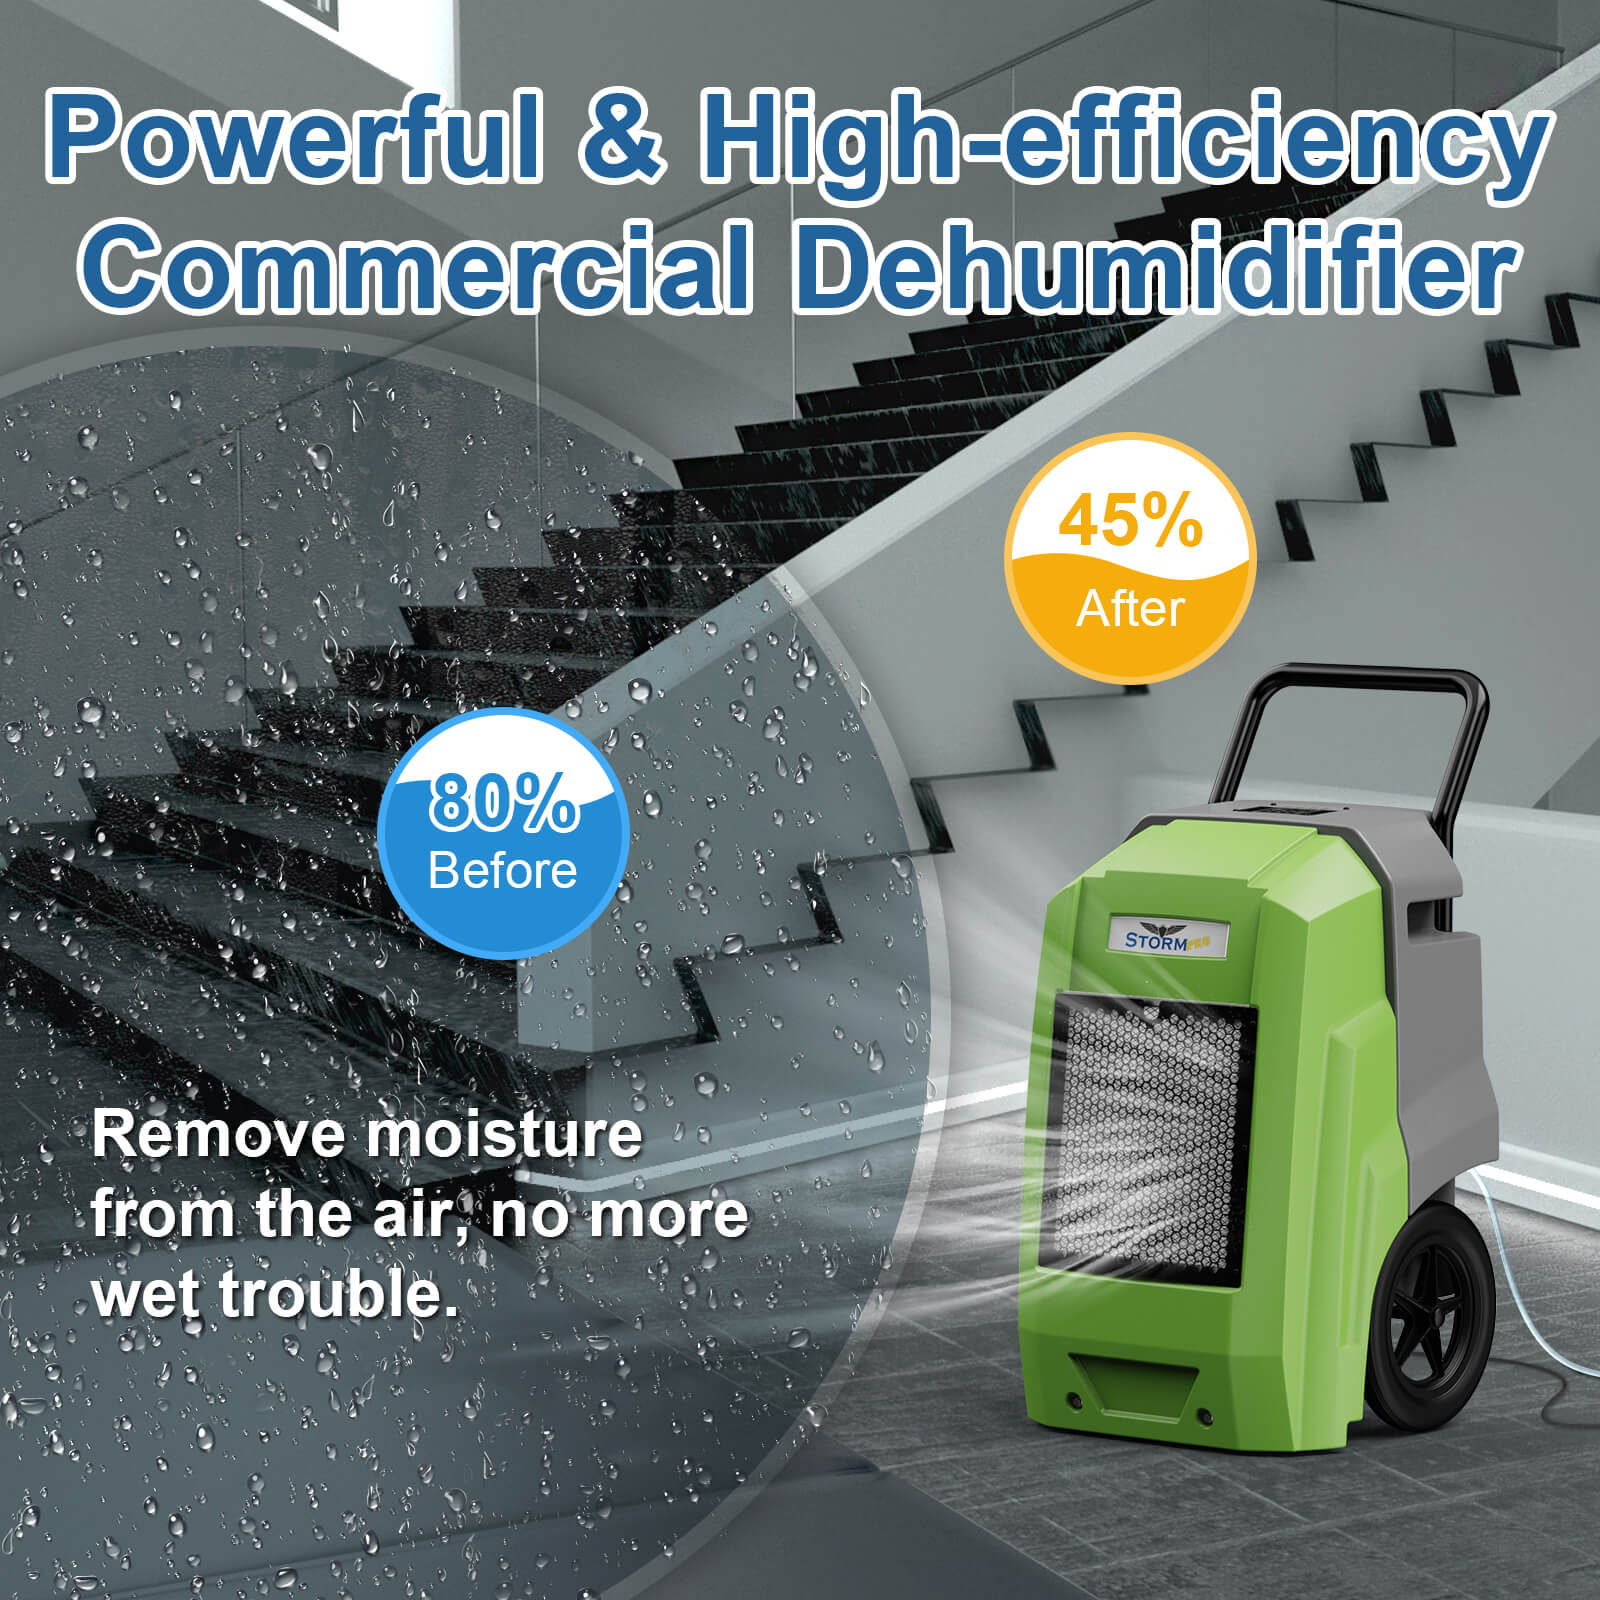 AlorAir 180 Pints Storm Pro Commercial Dehumidifier with Pump Drain Hose, Smart Wi-Fi Dehumidifier for Large Basement, Industrial or Commercial Space, Smart Wi-Fi, 5 Years Warranty AlorAir